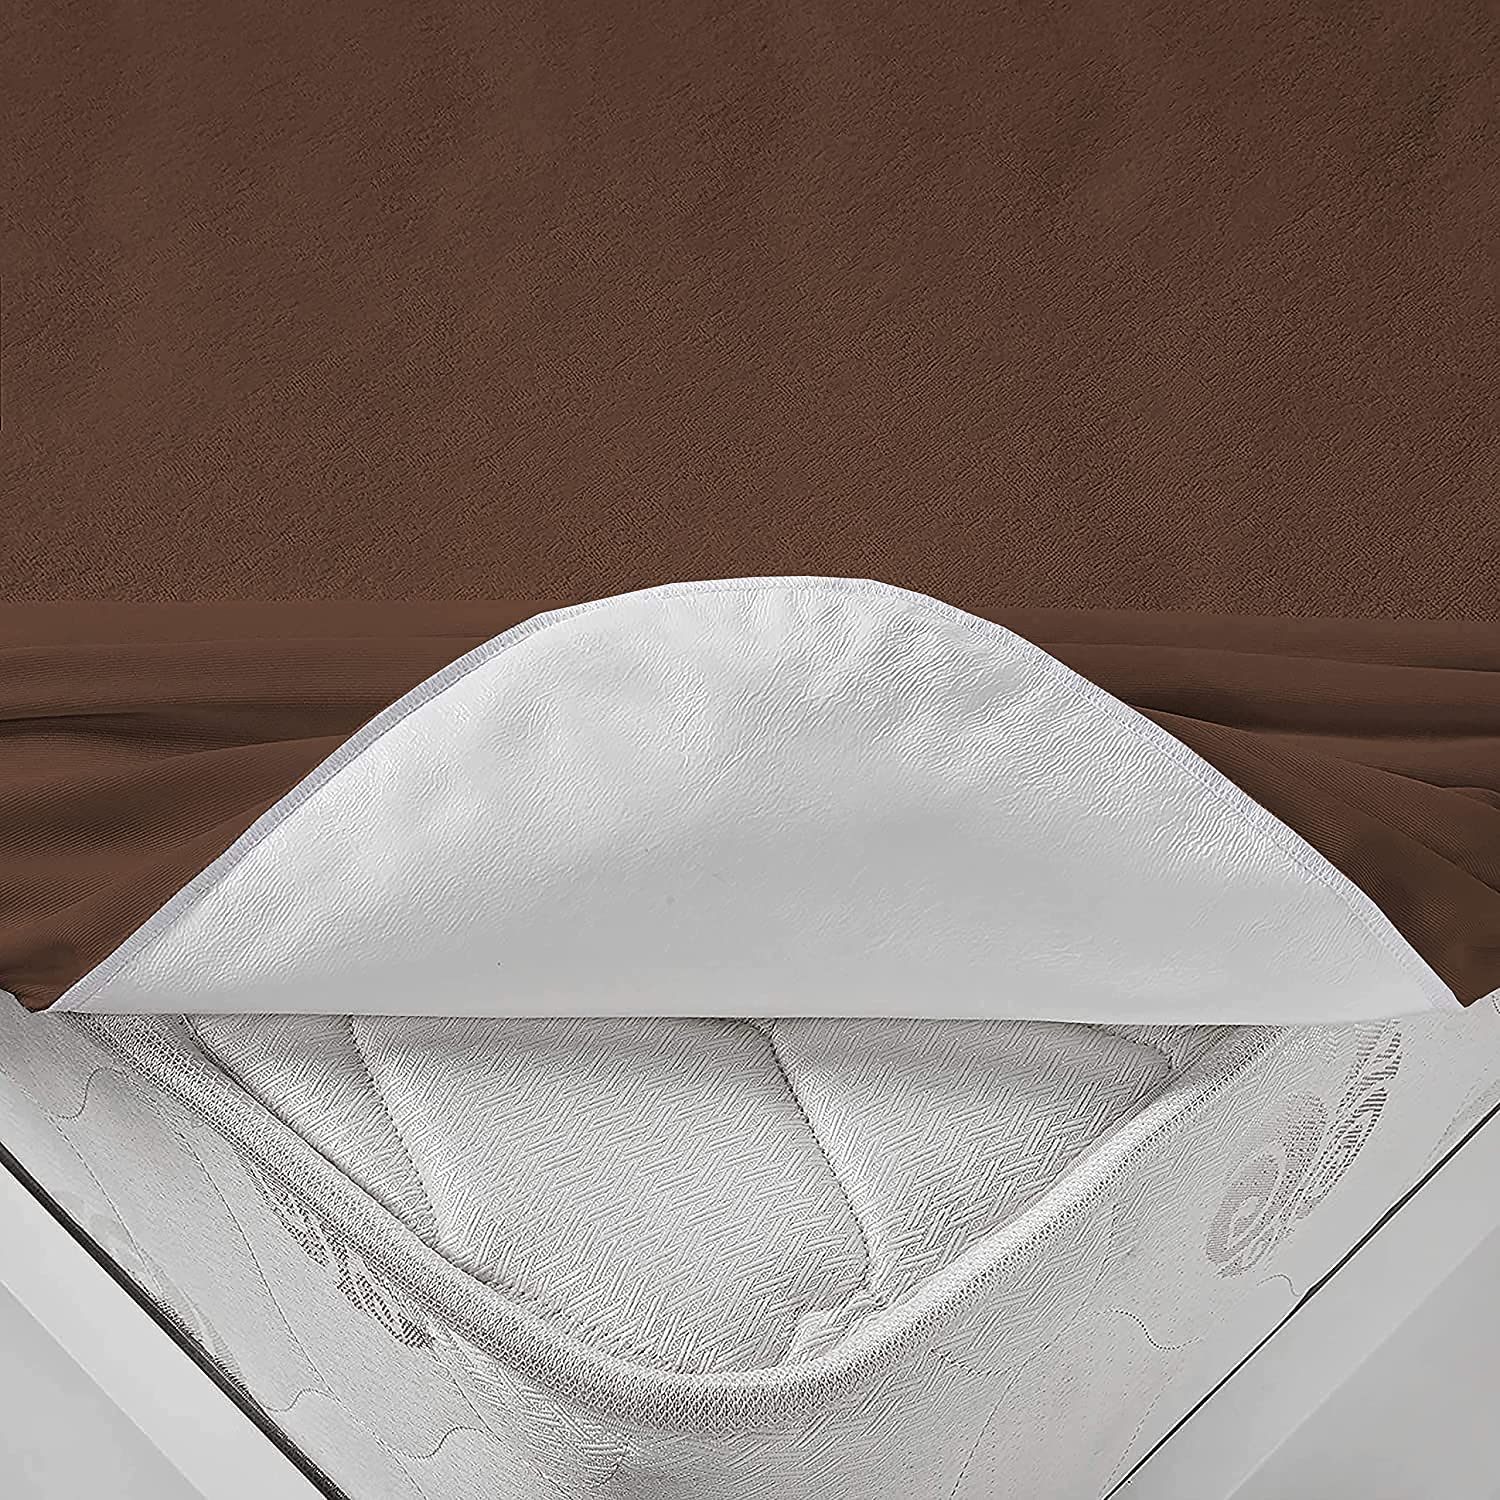 Terry Waterproof Mattress Protector-Brown Apricot